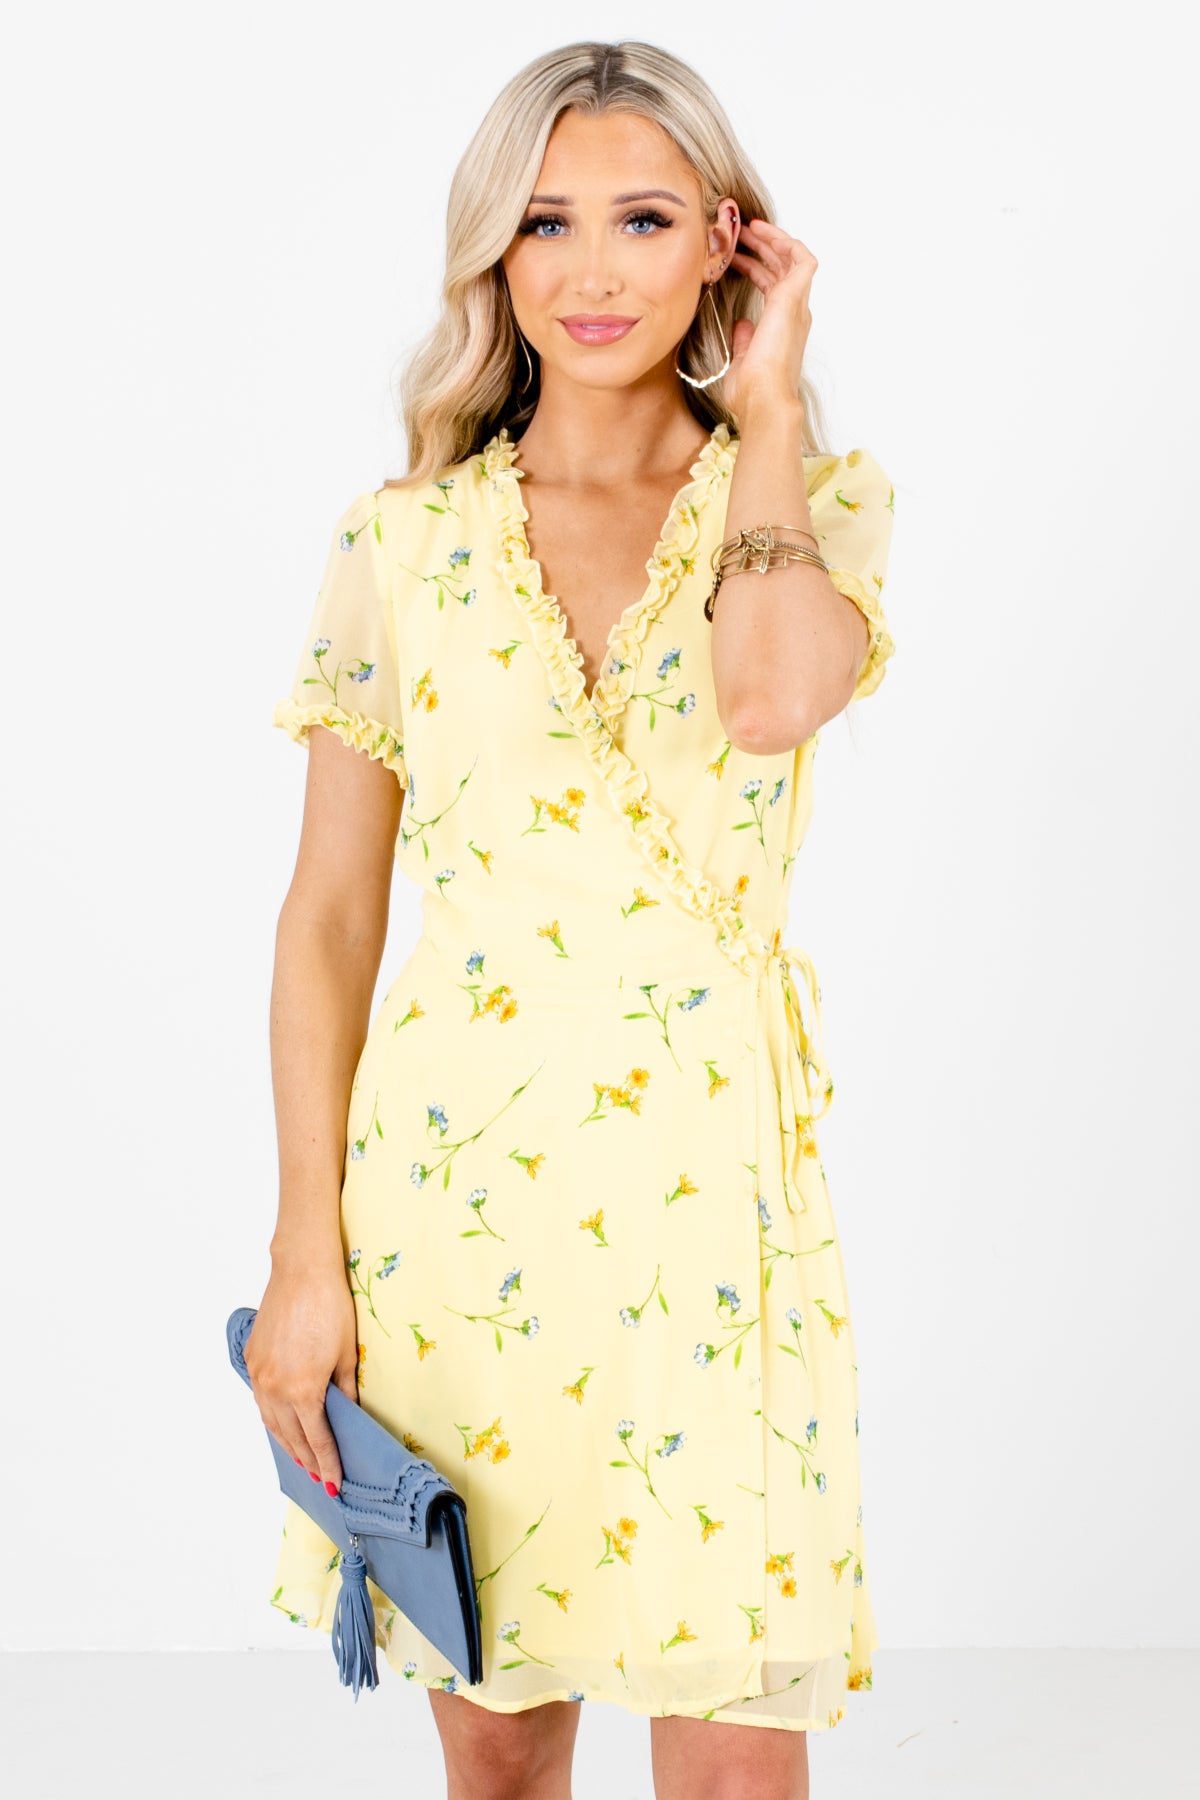 Yellow Multicolored Floral Patterned Boutique Mini Dresses for Women